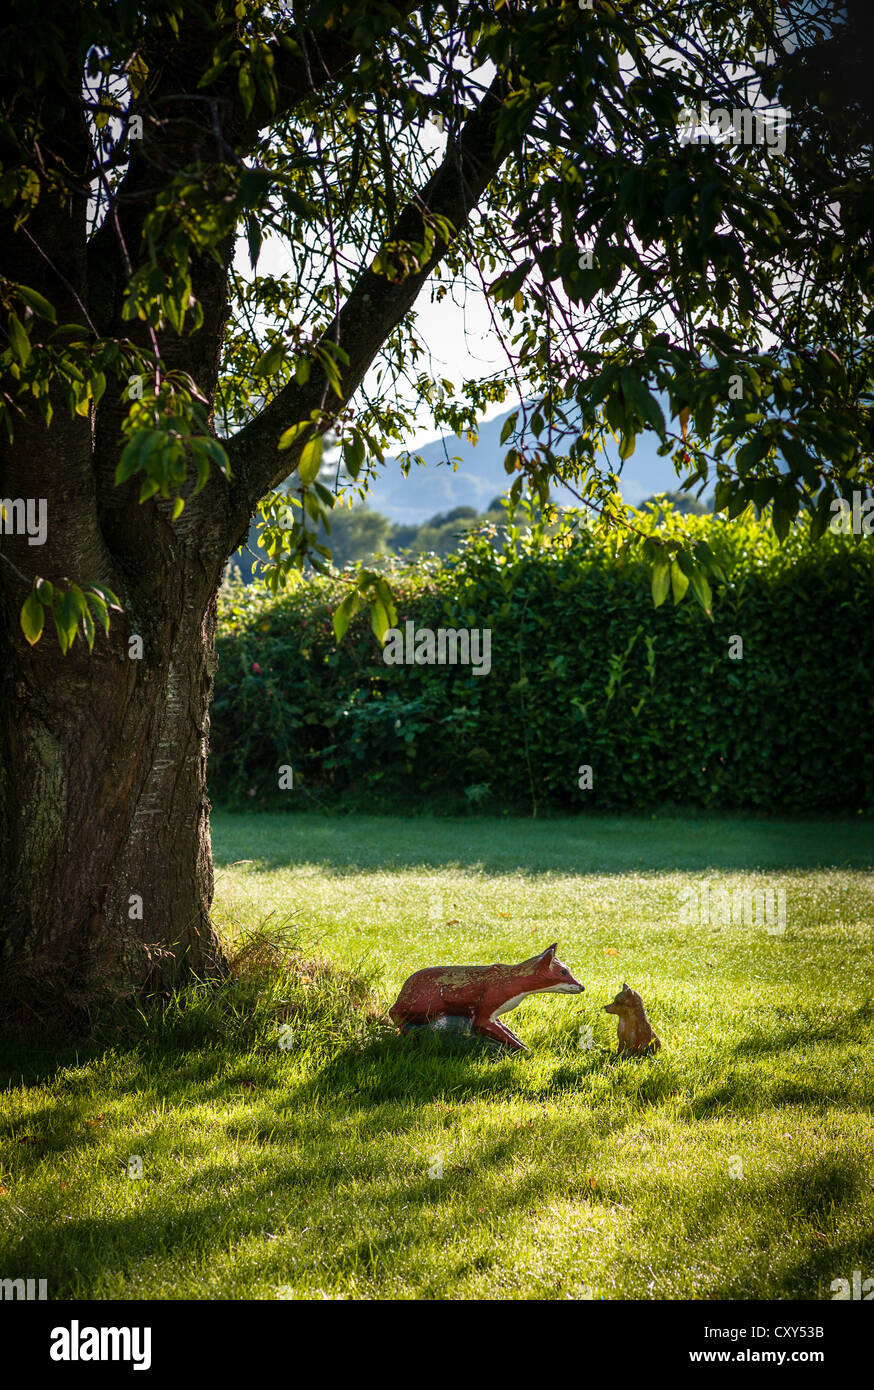 Ornamental fox and cub in a country garden in UK Stock Photo